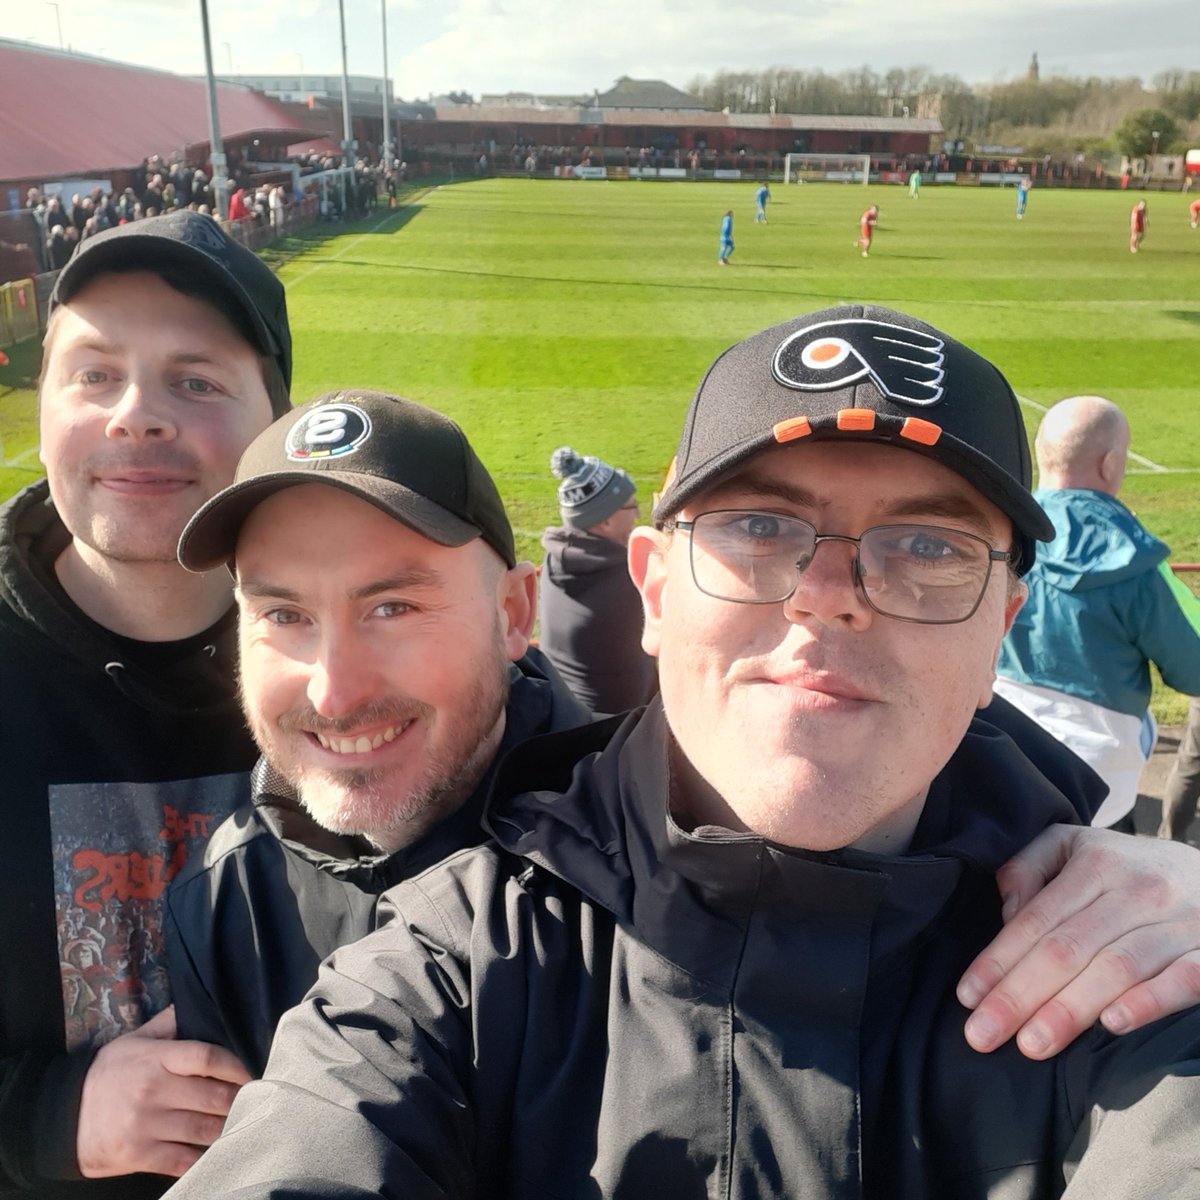 Workington 0-3 @MarineAFC Top class away day performance. Three points gained! Up The Mariners! @CrosenderWay